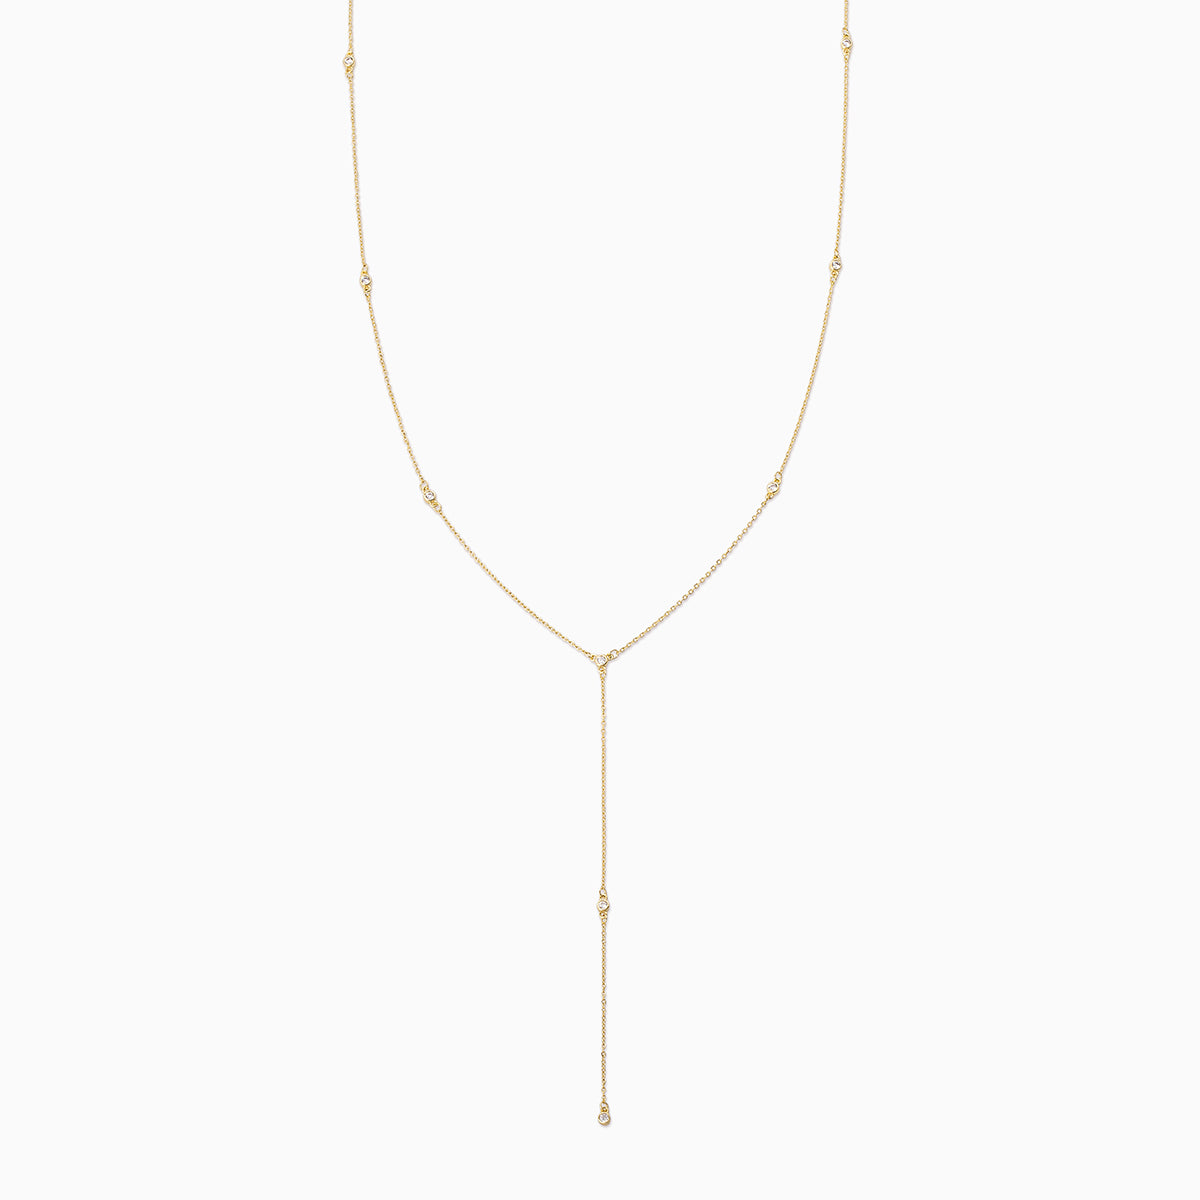 Icy Lariat Necklace | Gold | Product Image | Uncommon James